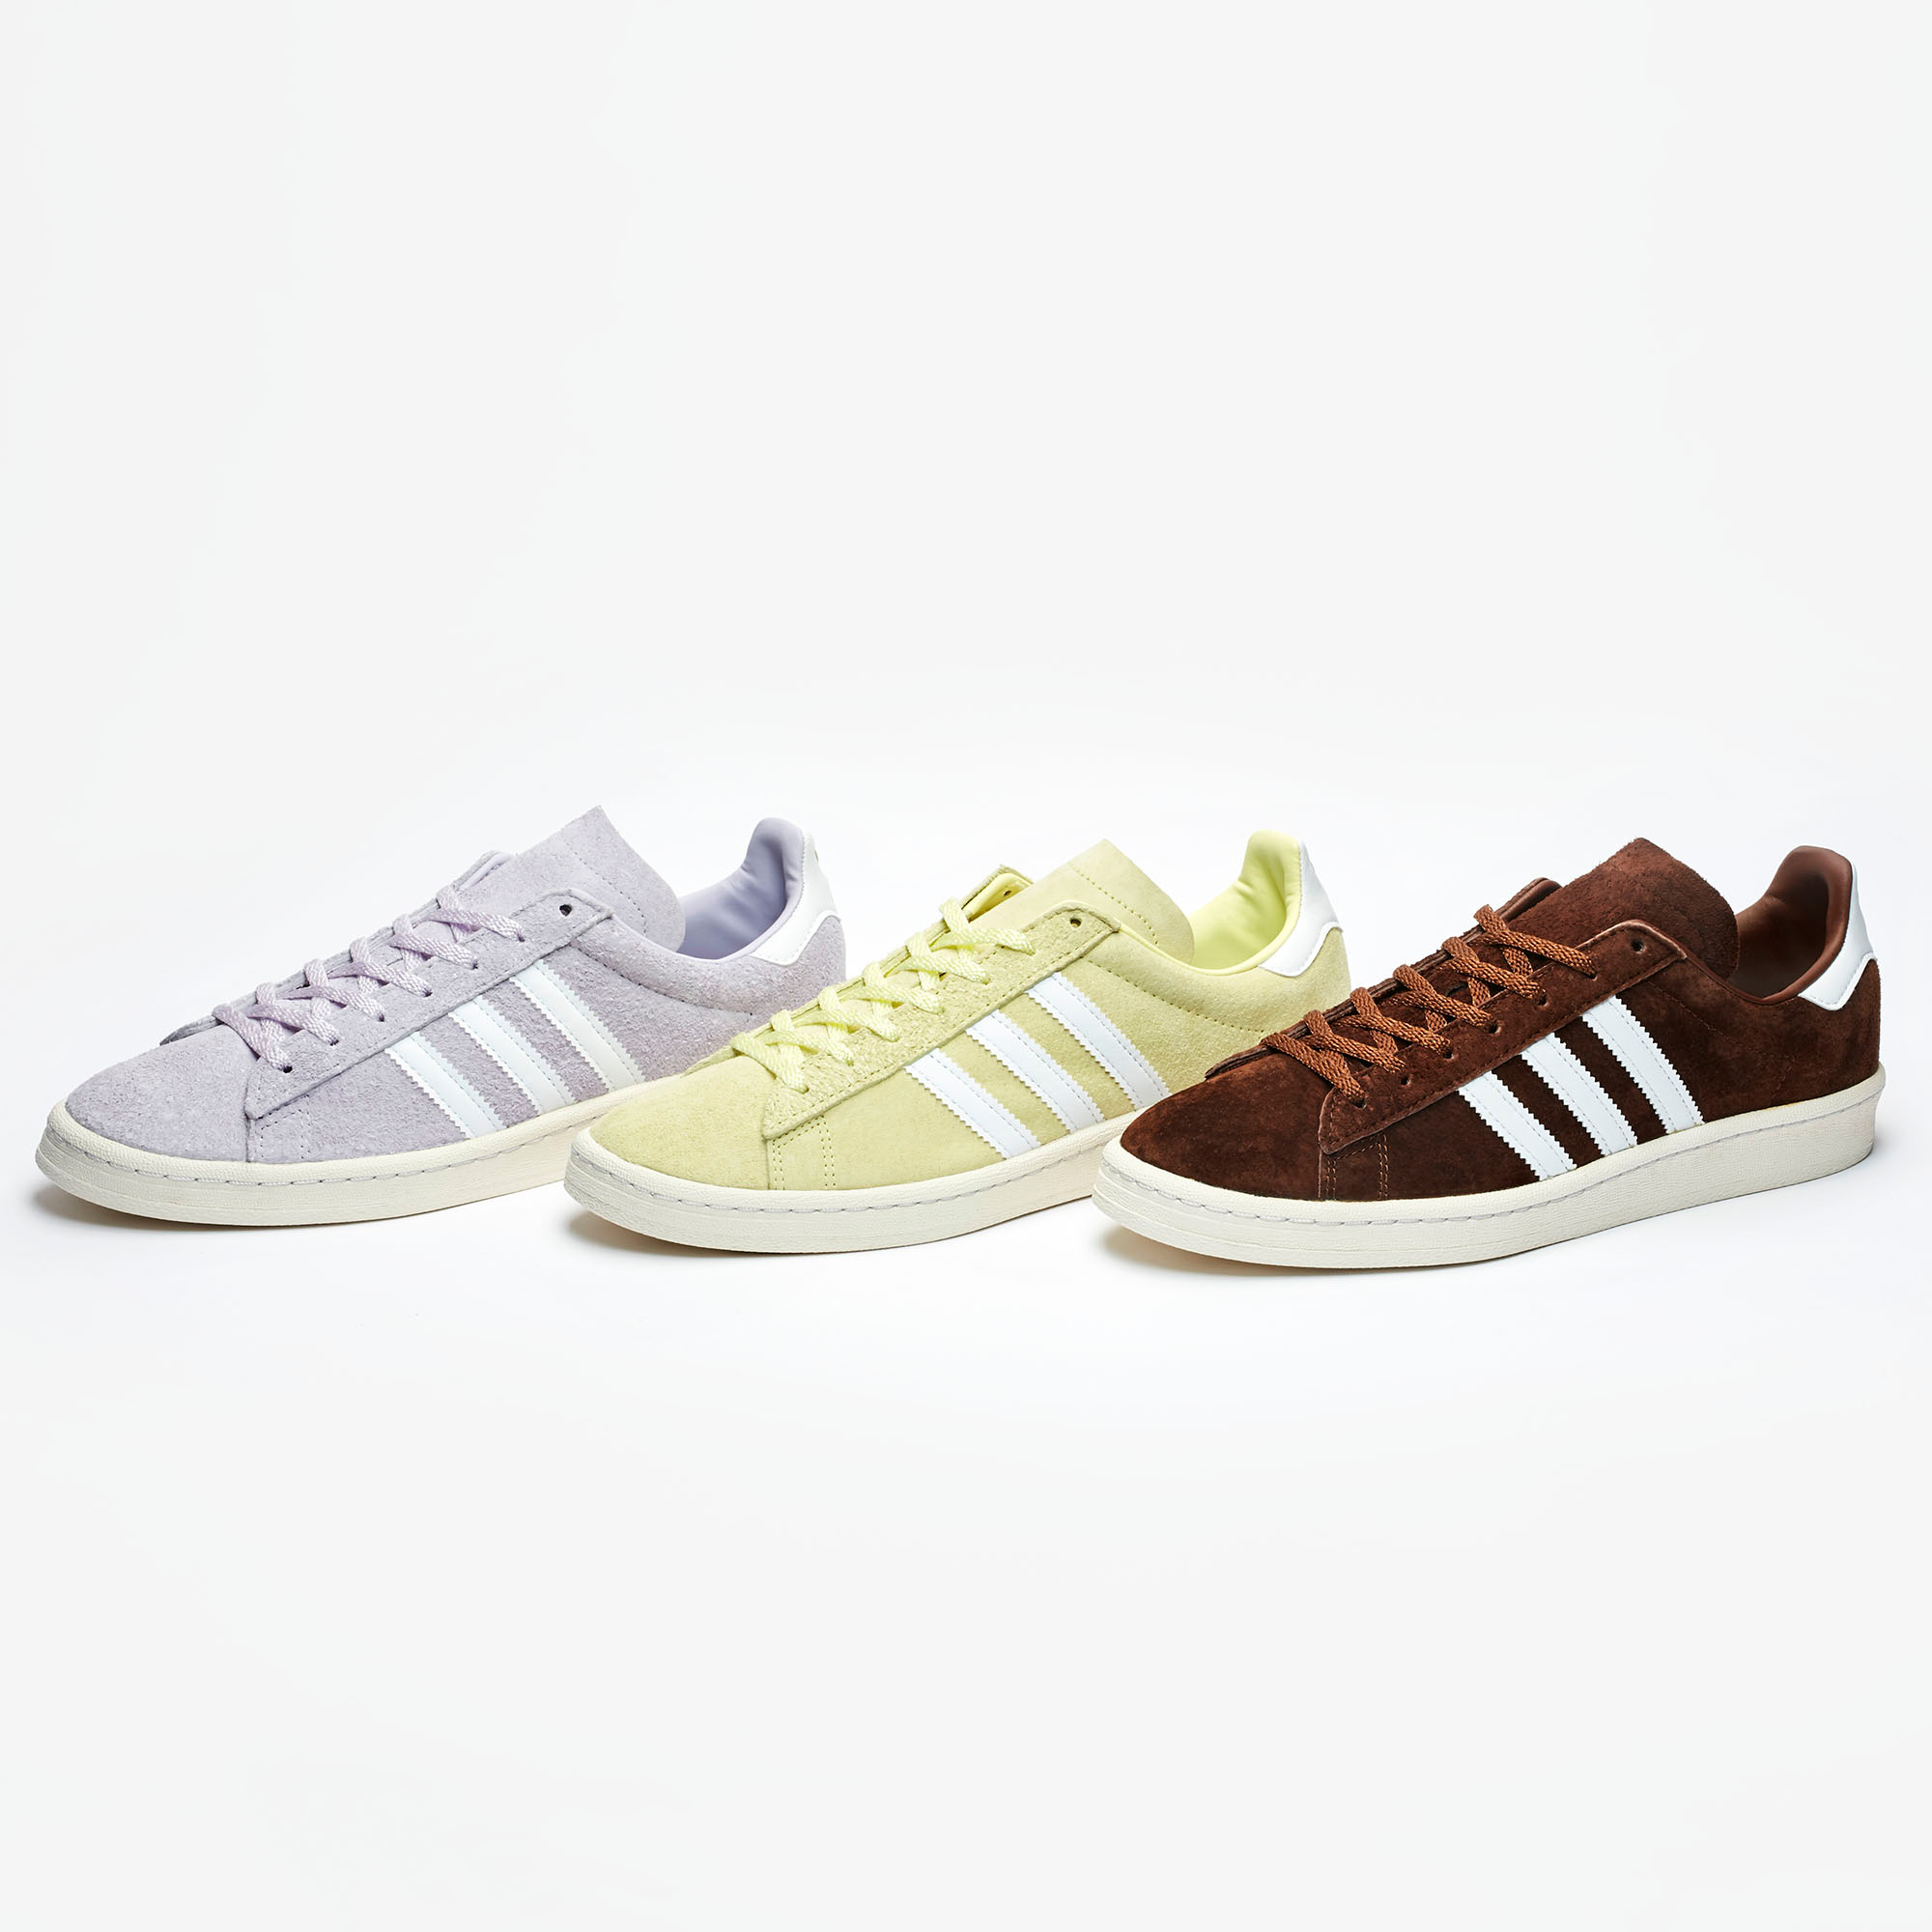 SNS on Twitter: "Sign-ups now open for the adidas Campus Homemade Pack "Purple", "Yellow" and "Brown" in the SNS app. Registrations for online with delivery end on August 28th at